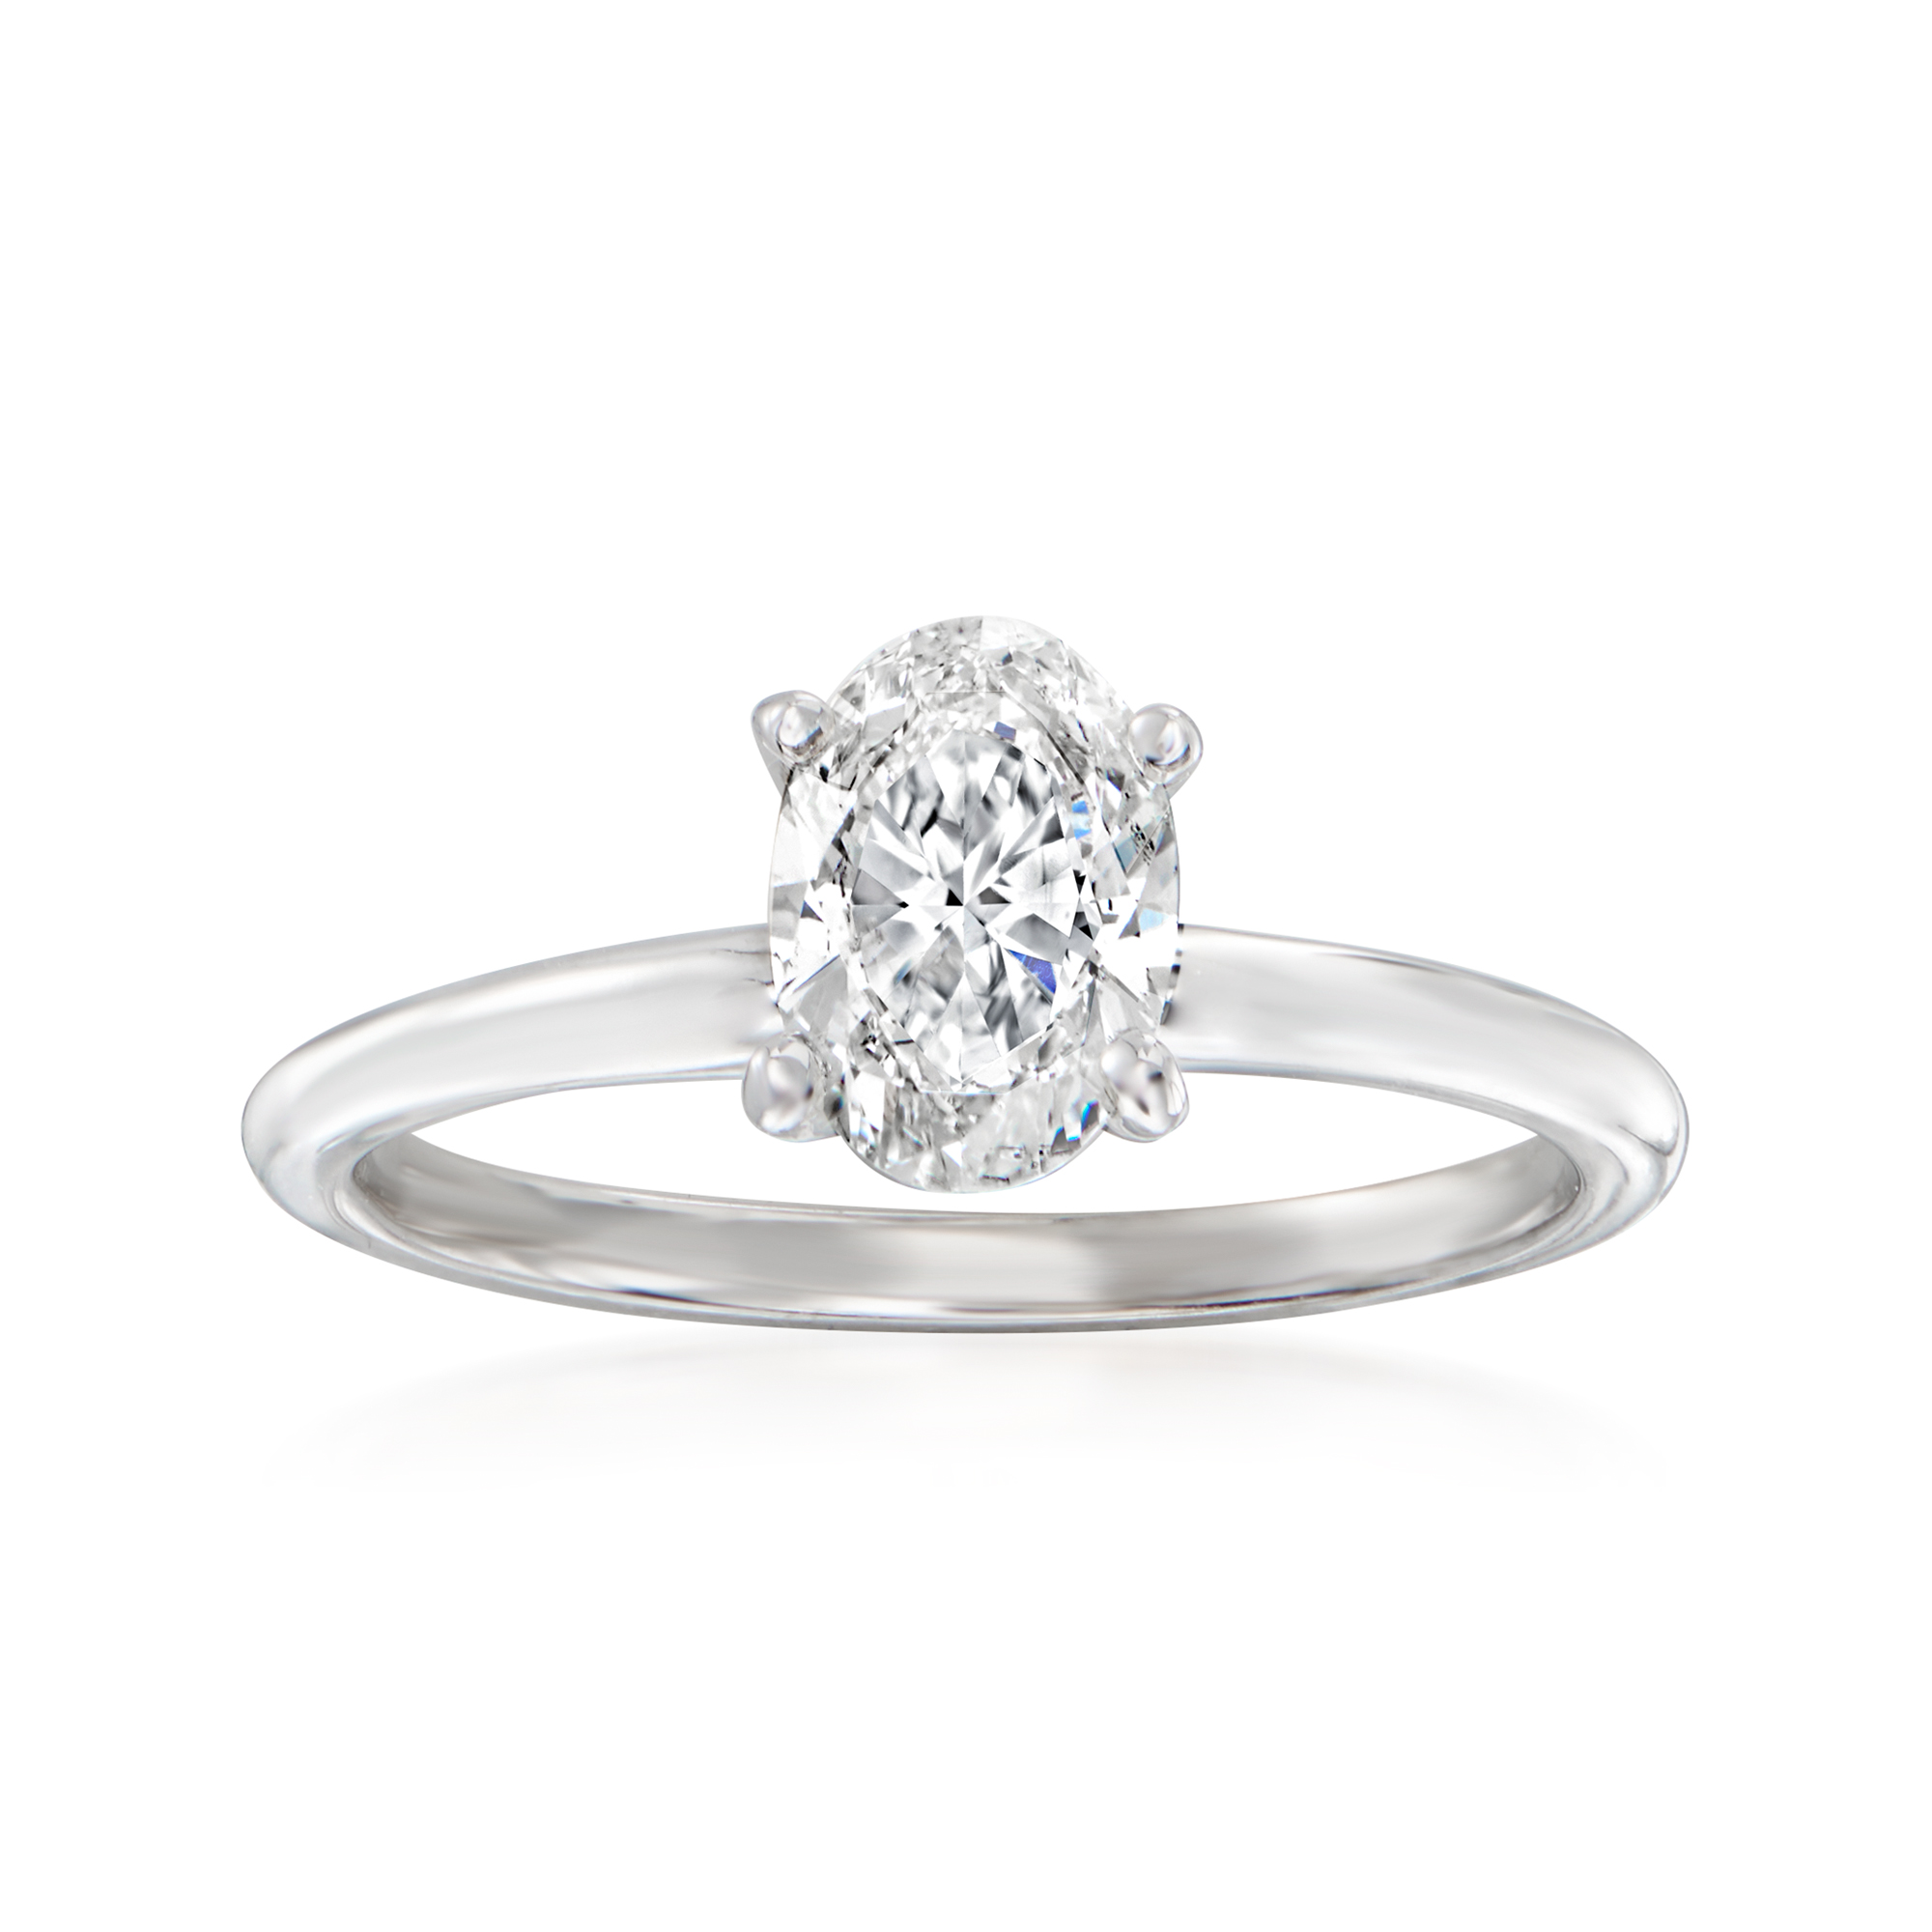 .96 Carat Certified Diamond Solitaire Ring in 14kt White Gold | Ross 